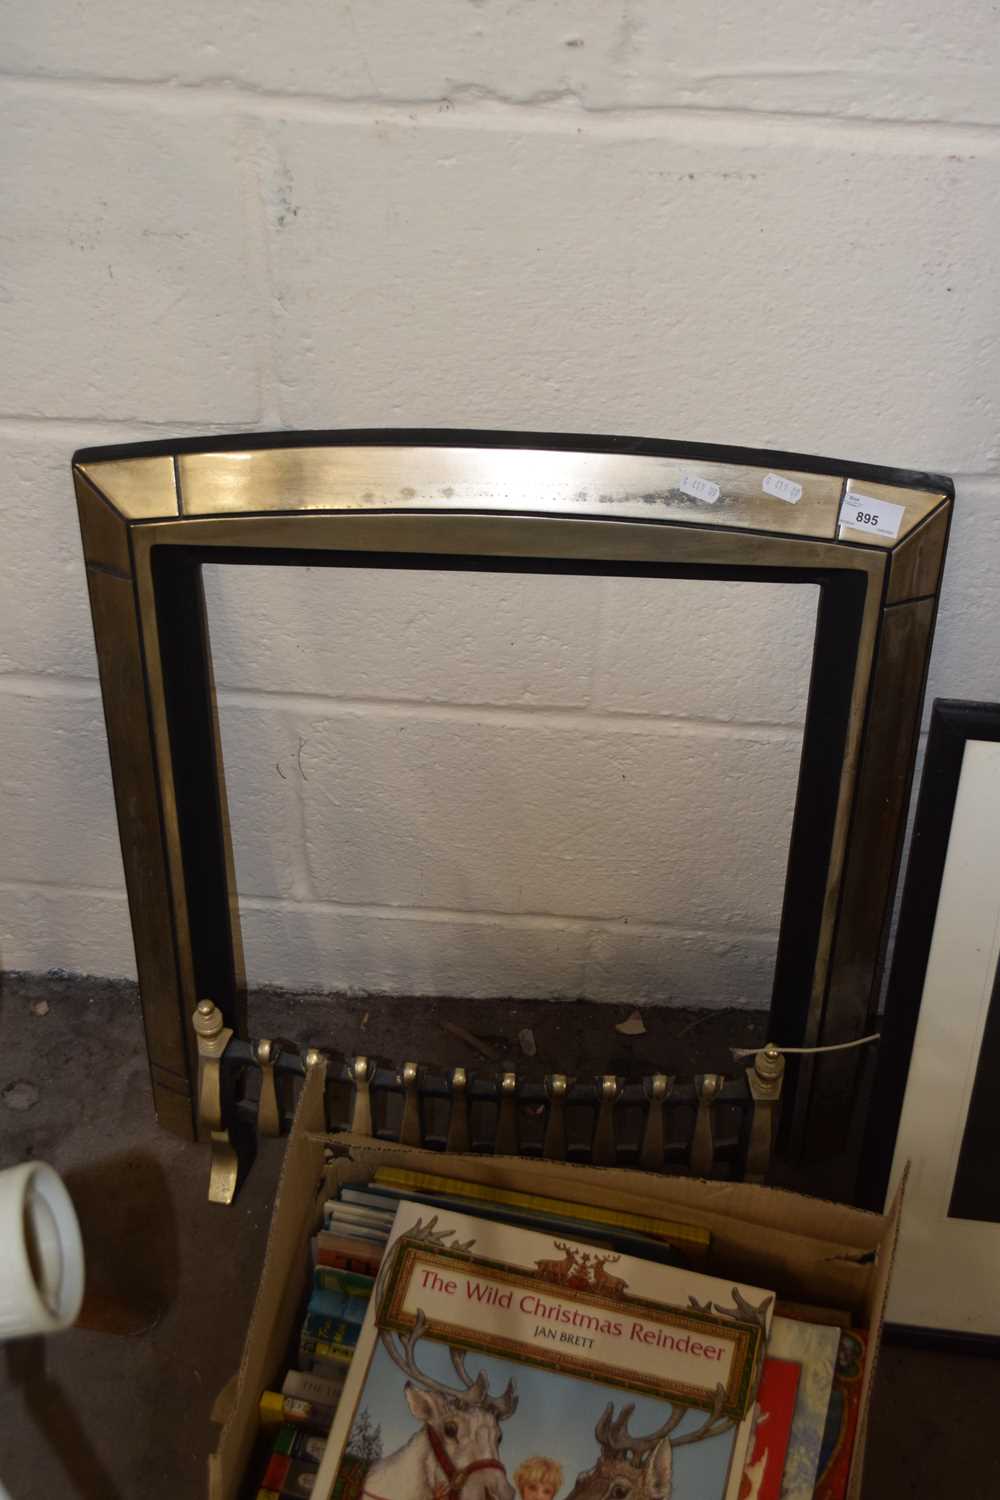 Modern fire surround and grate